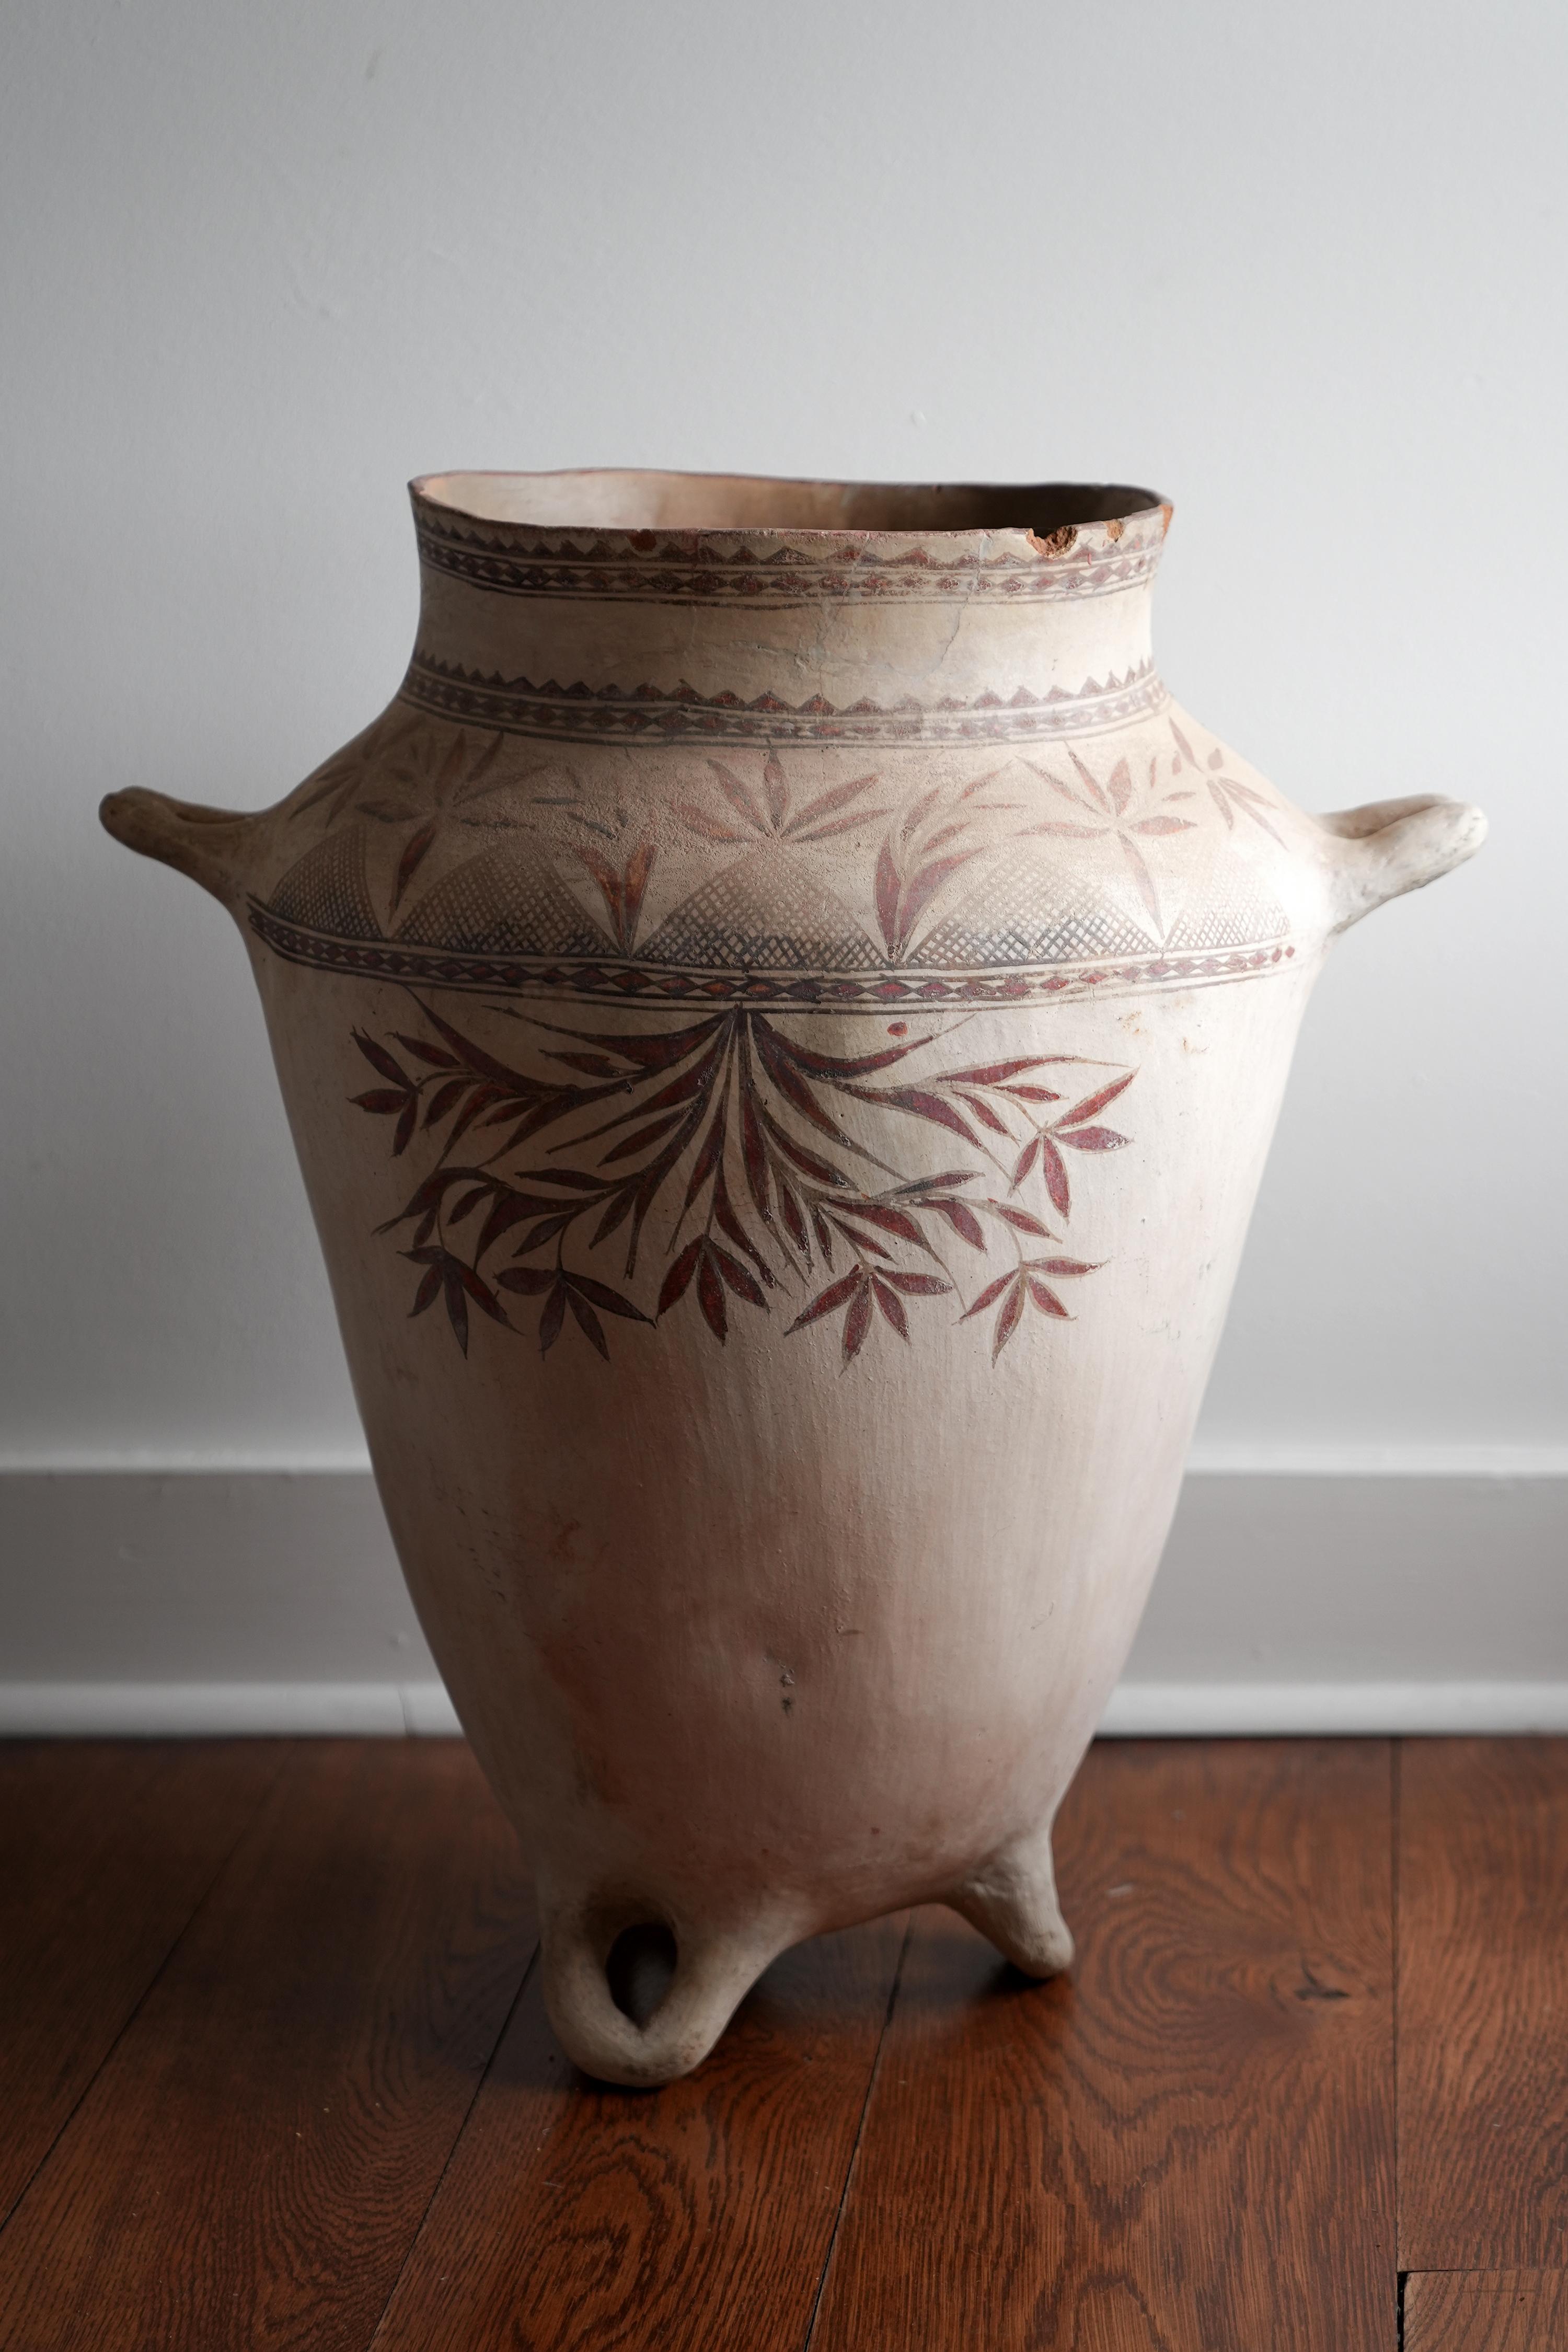 19th C Mexican terracotta painted pot.
Beautifully decorated survivor. This piece has old restorations but we are lucky its still around. Very rare.